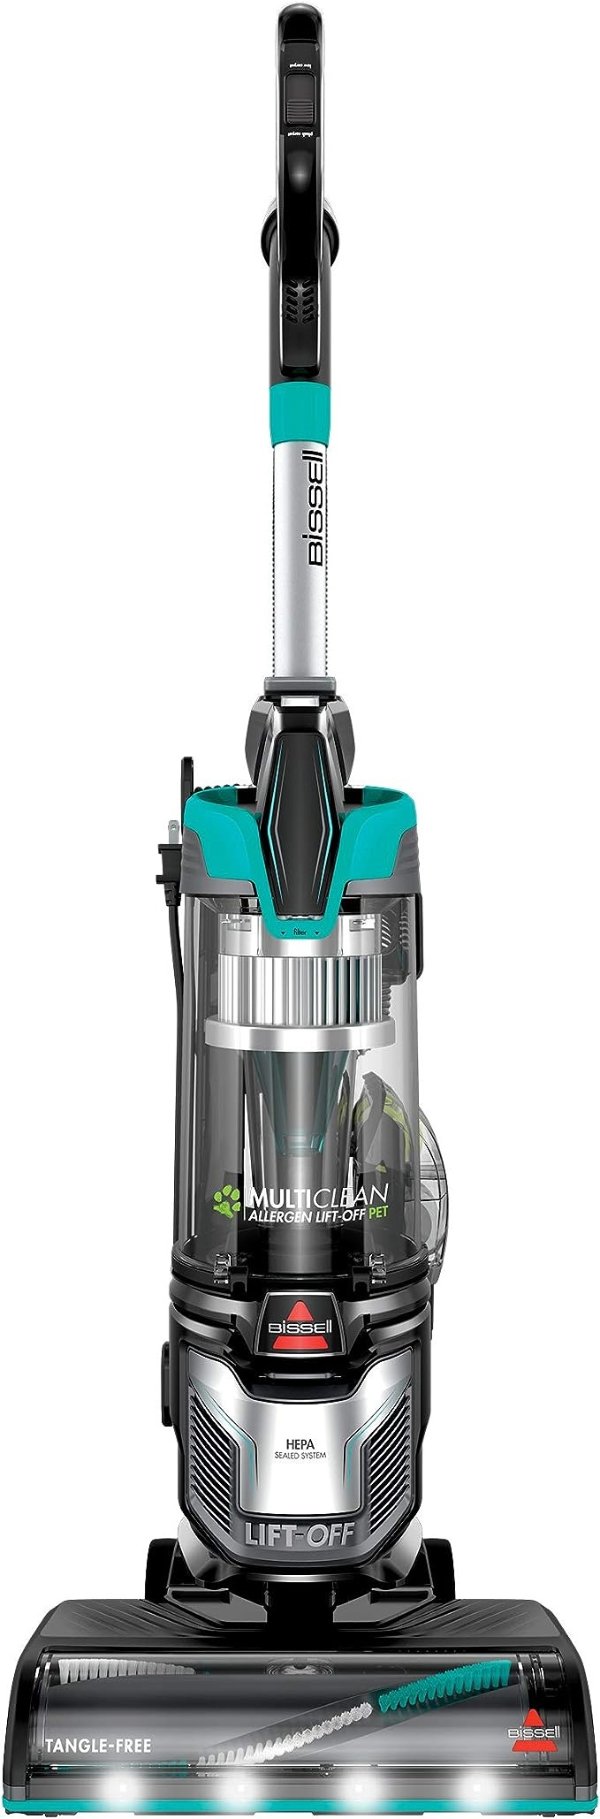 2998 MultiClean Allergen Lift-Off Pet Vacuum with HEPA Filter Sealed System, Lift-Off Portable Pod, LED Headlights, Specialized Pet Tools, Easy Empty,Blue/ Black